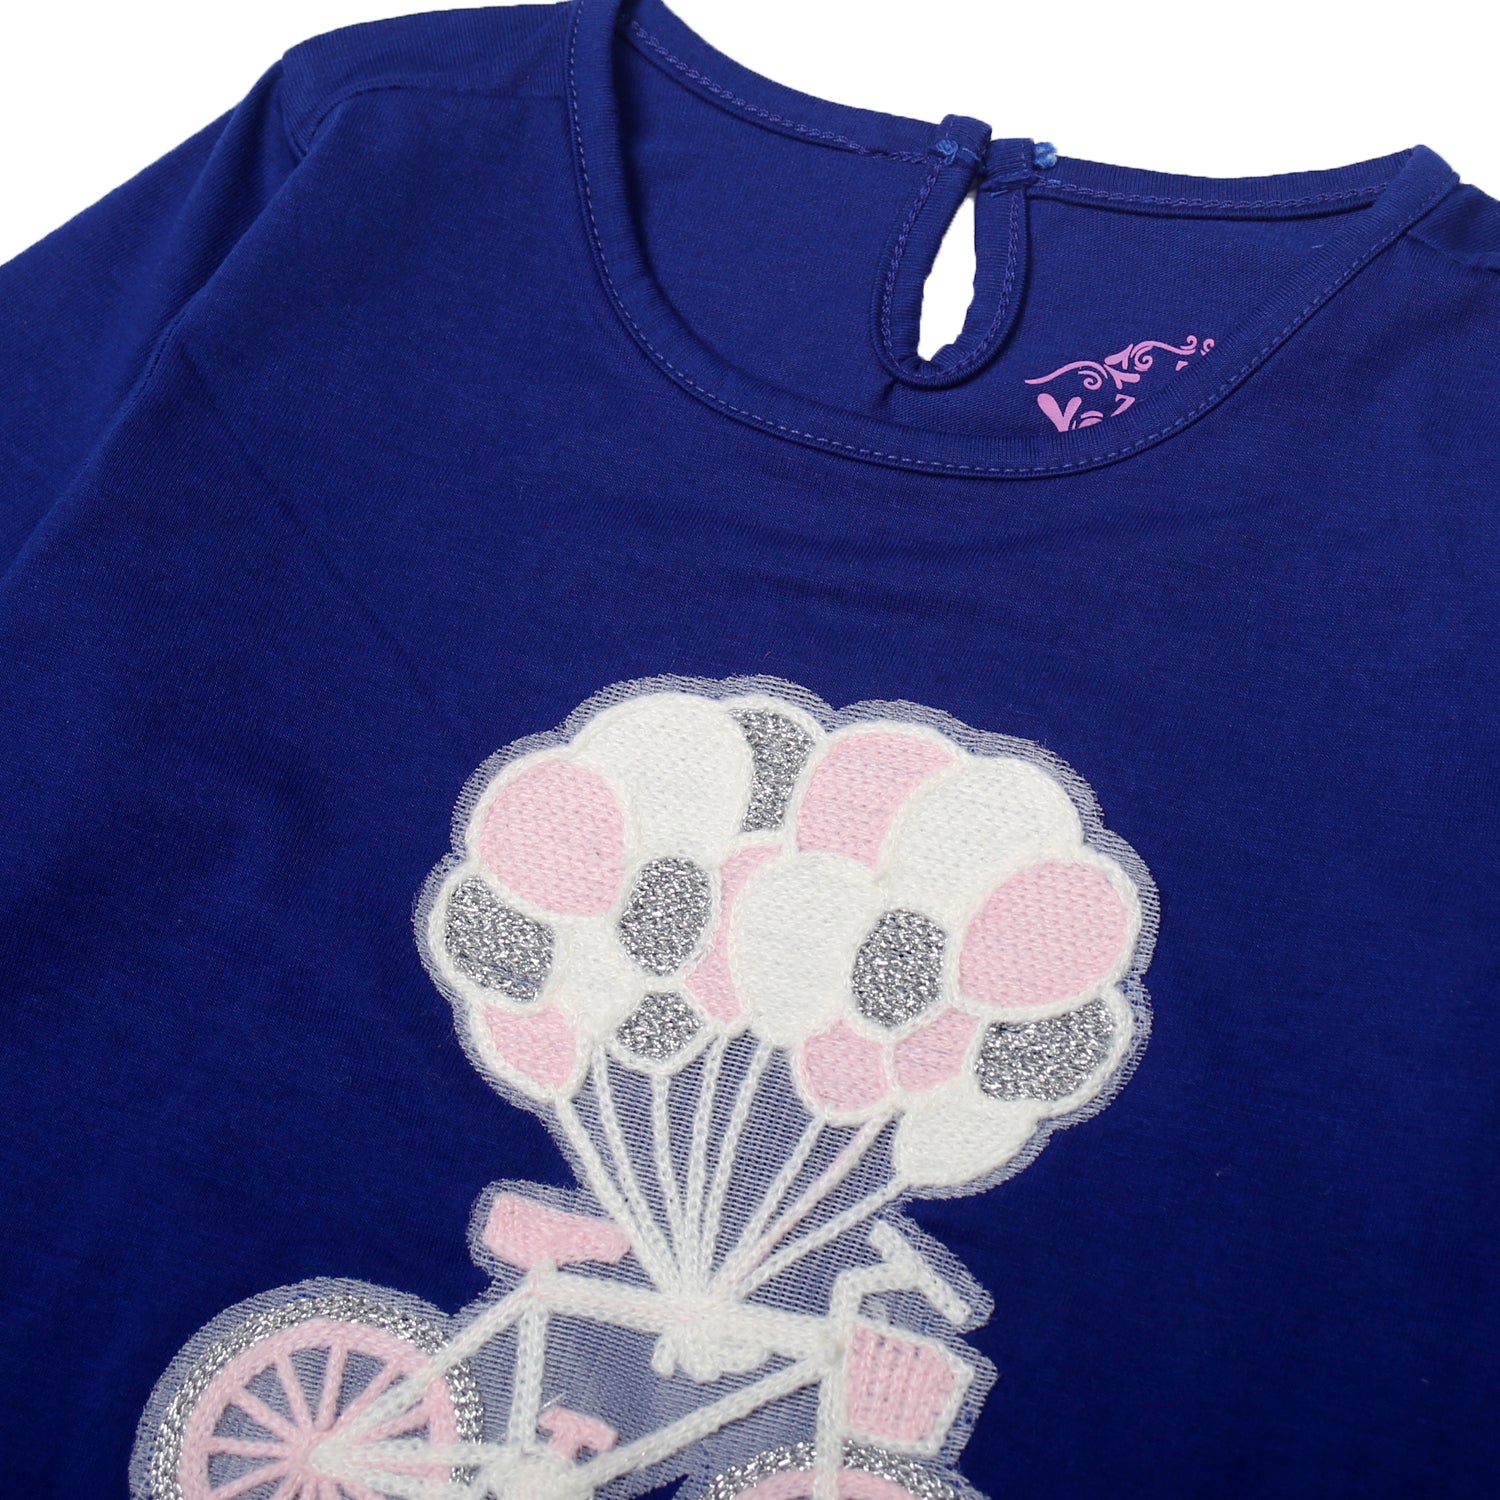 NEW NAVY BLUE CYCLE PRINTED T-SHIRT FOR GIRLS